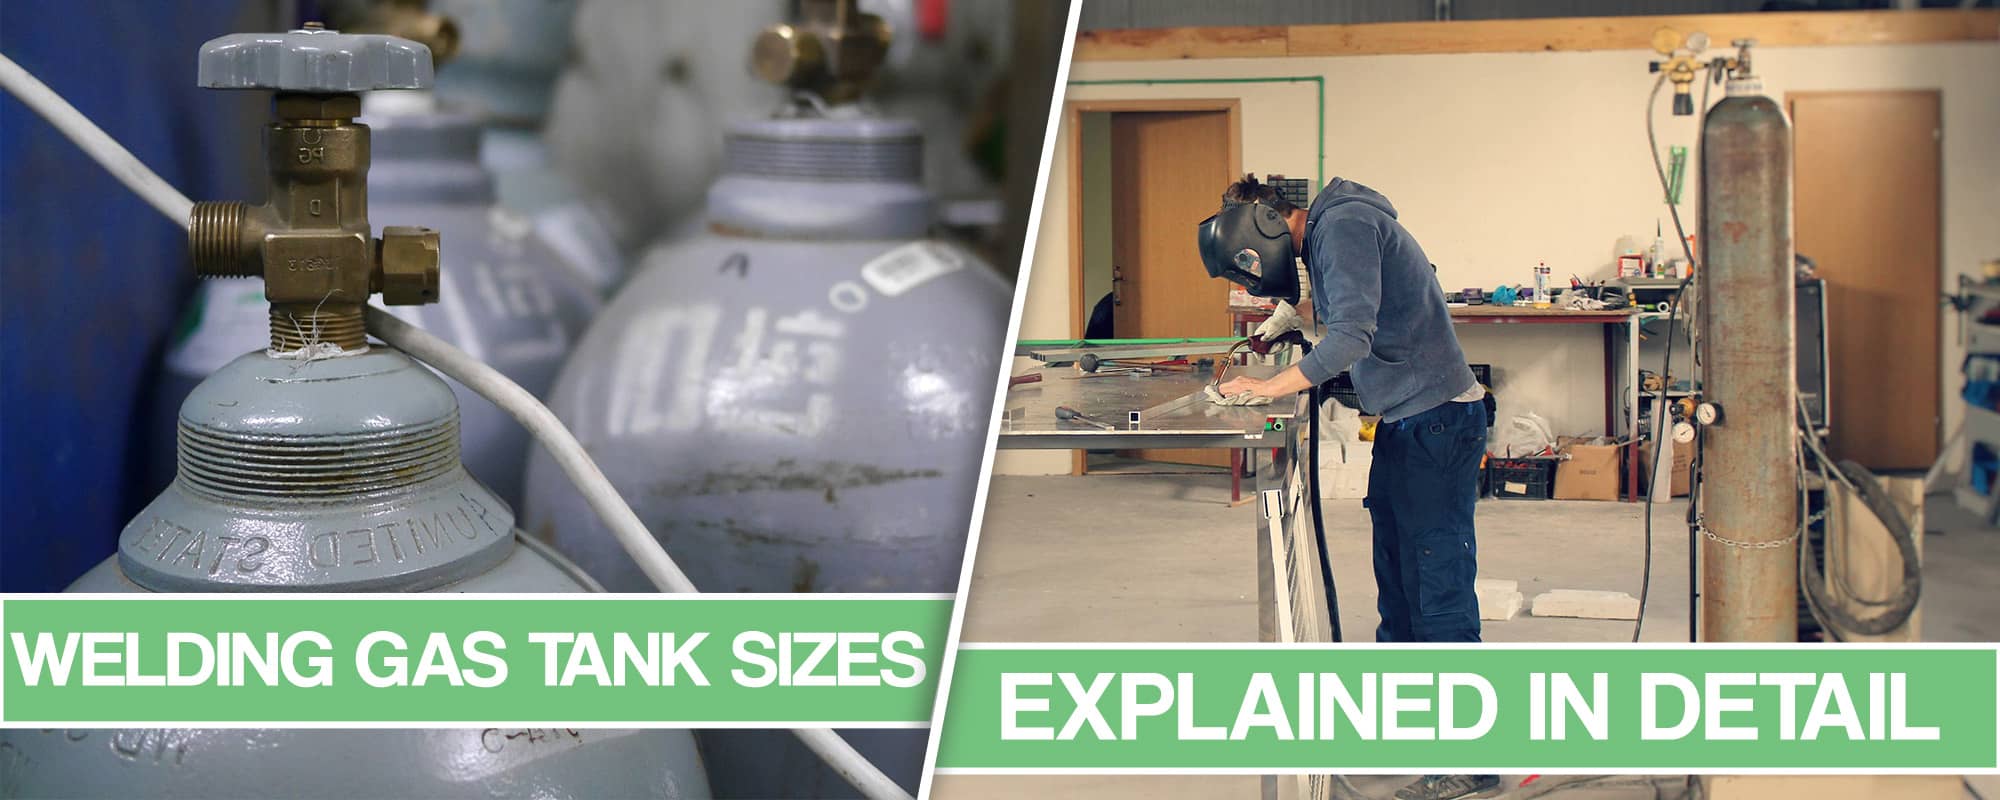 Welding Cylinders Gas Tank Sizes Explained – Argon and MIG CO2 Sizes Chart and Use time Estimation